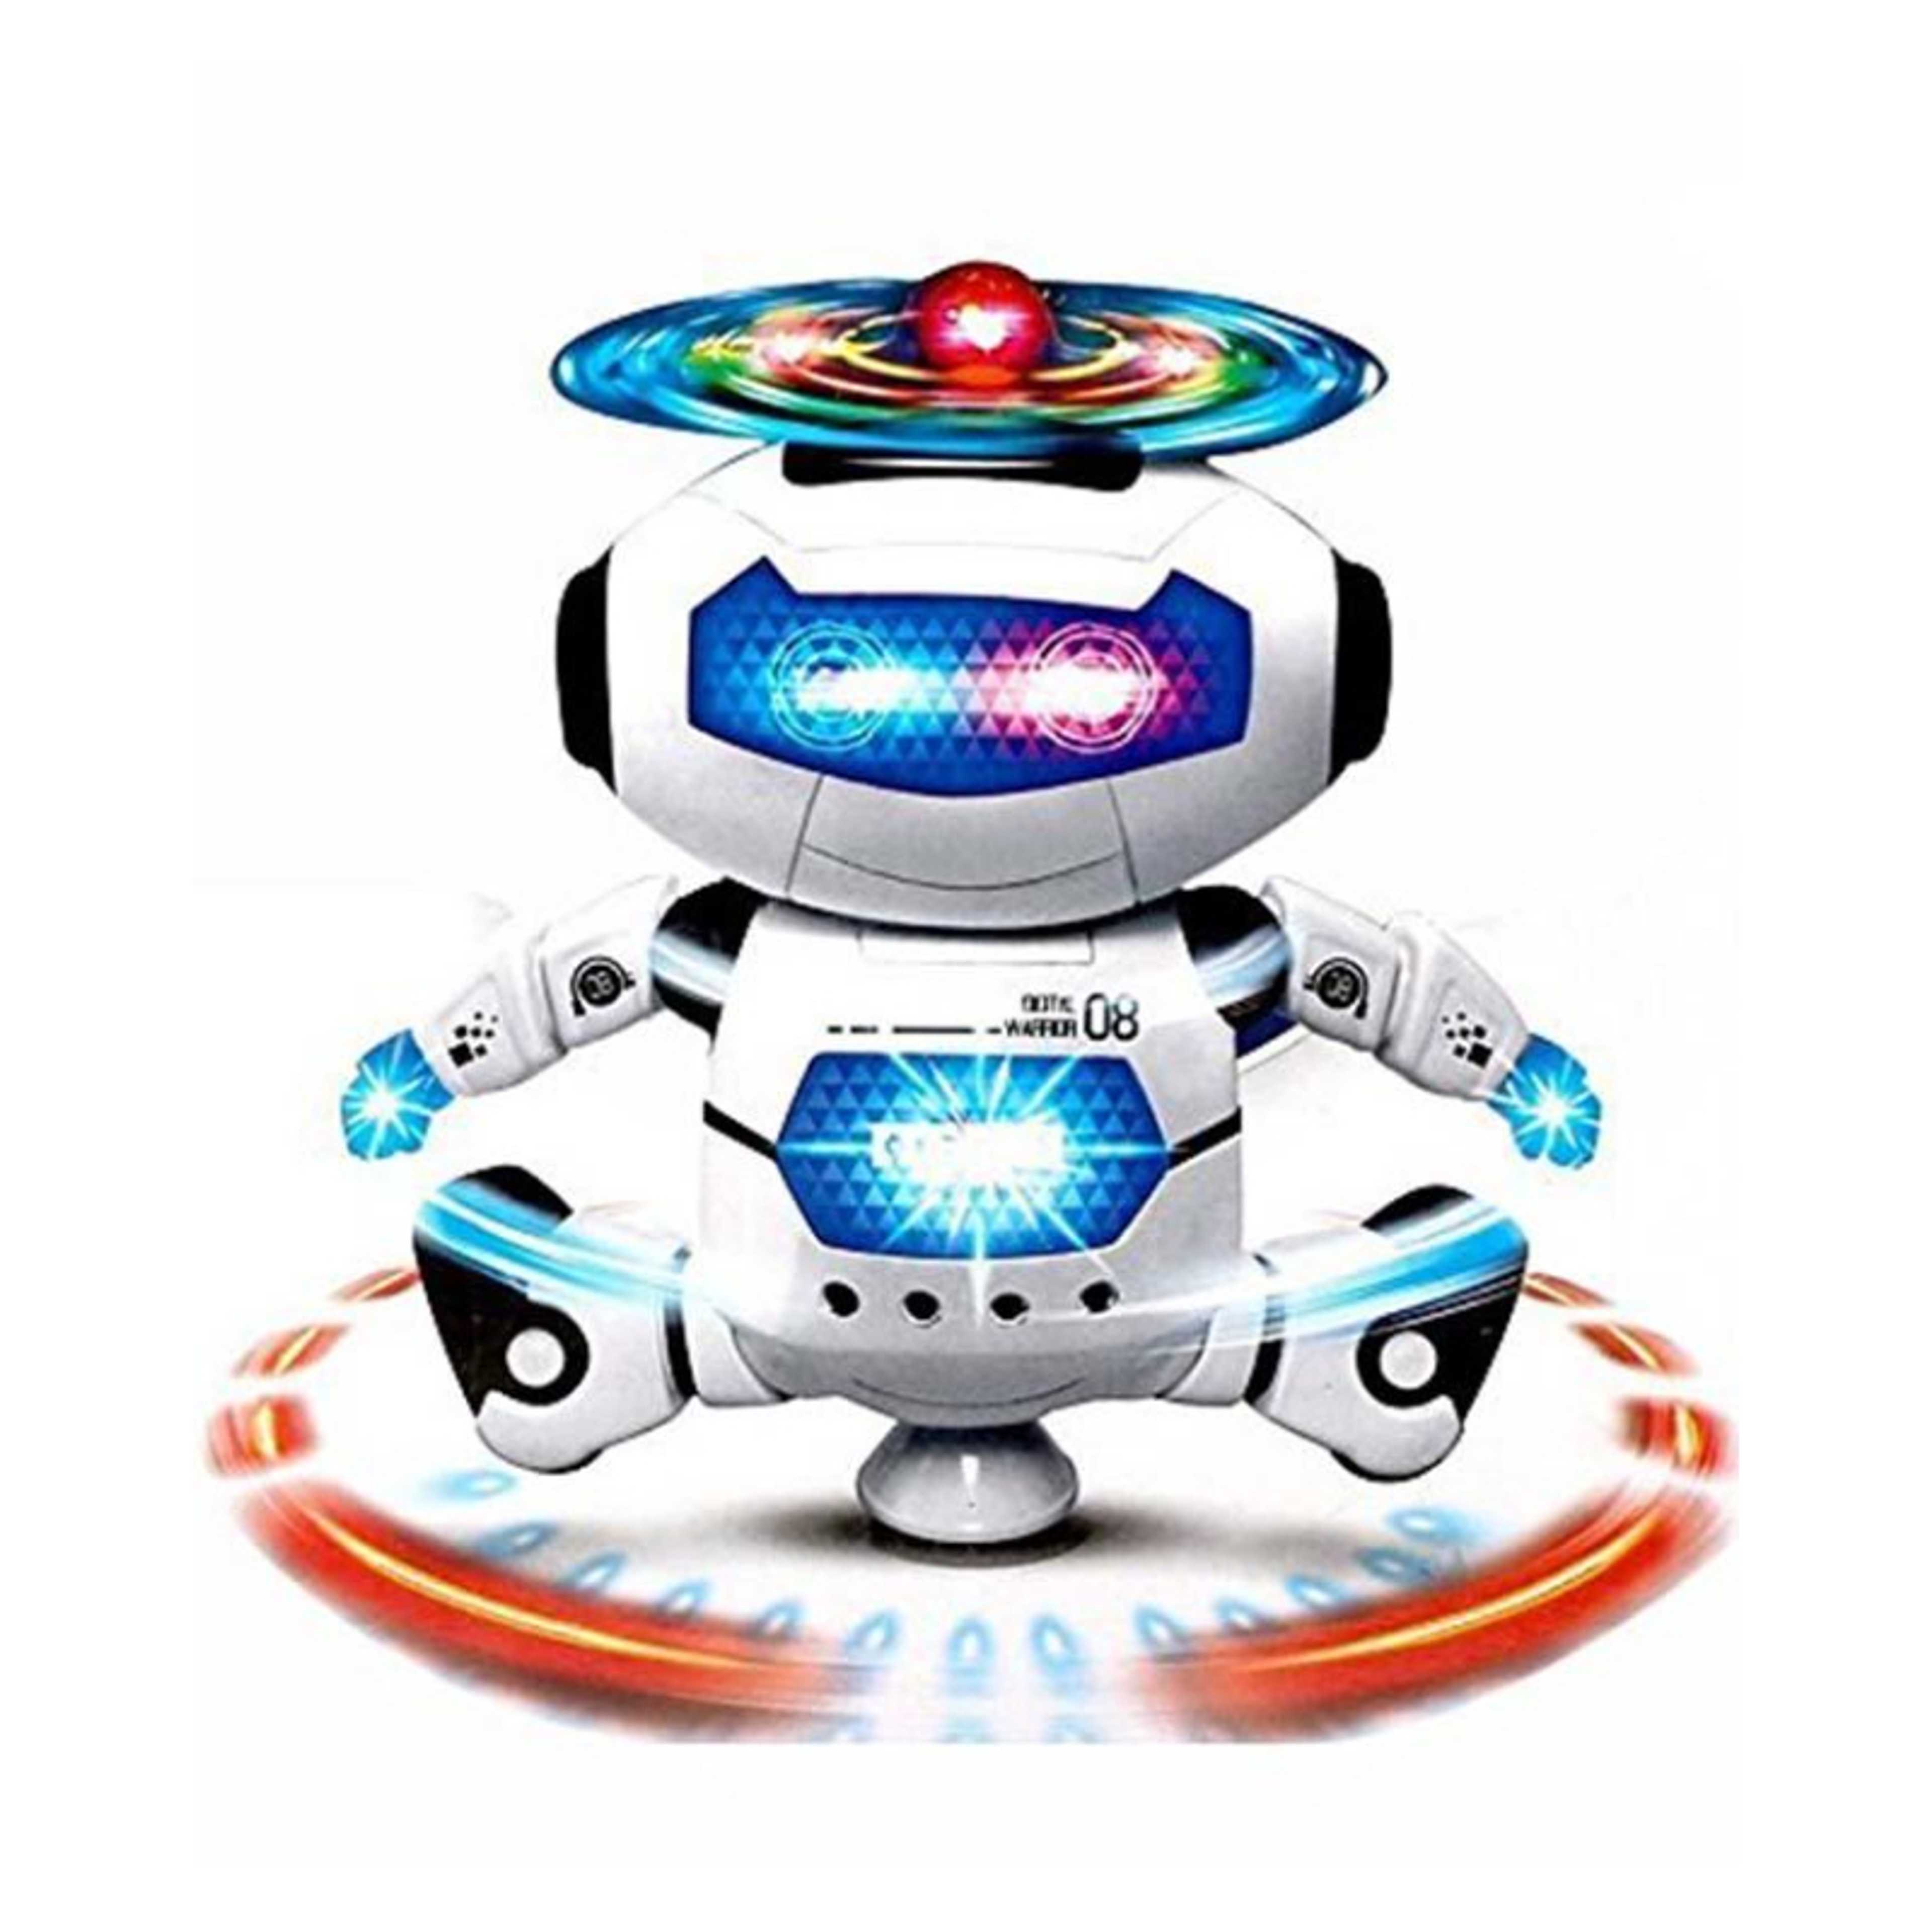 Dancing Robot Toy With 360 Degree Moving Function